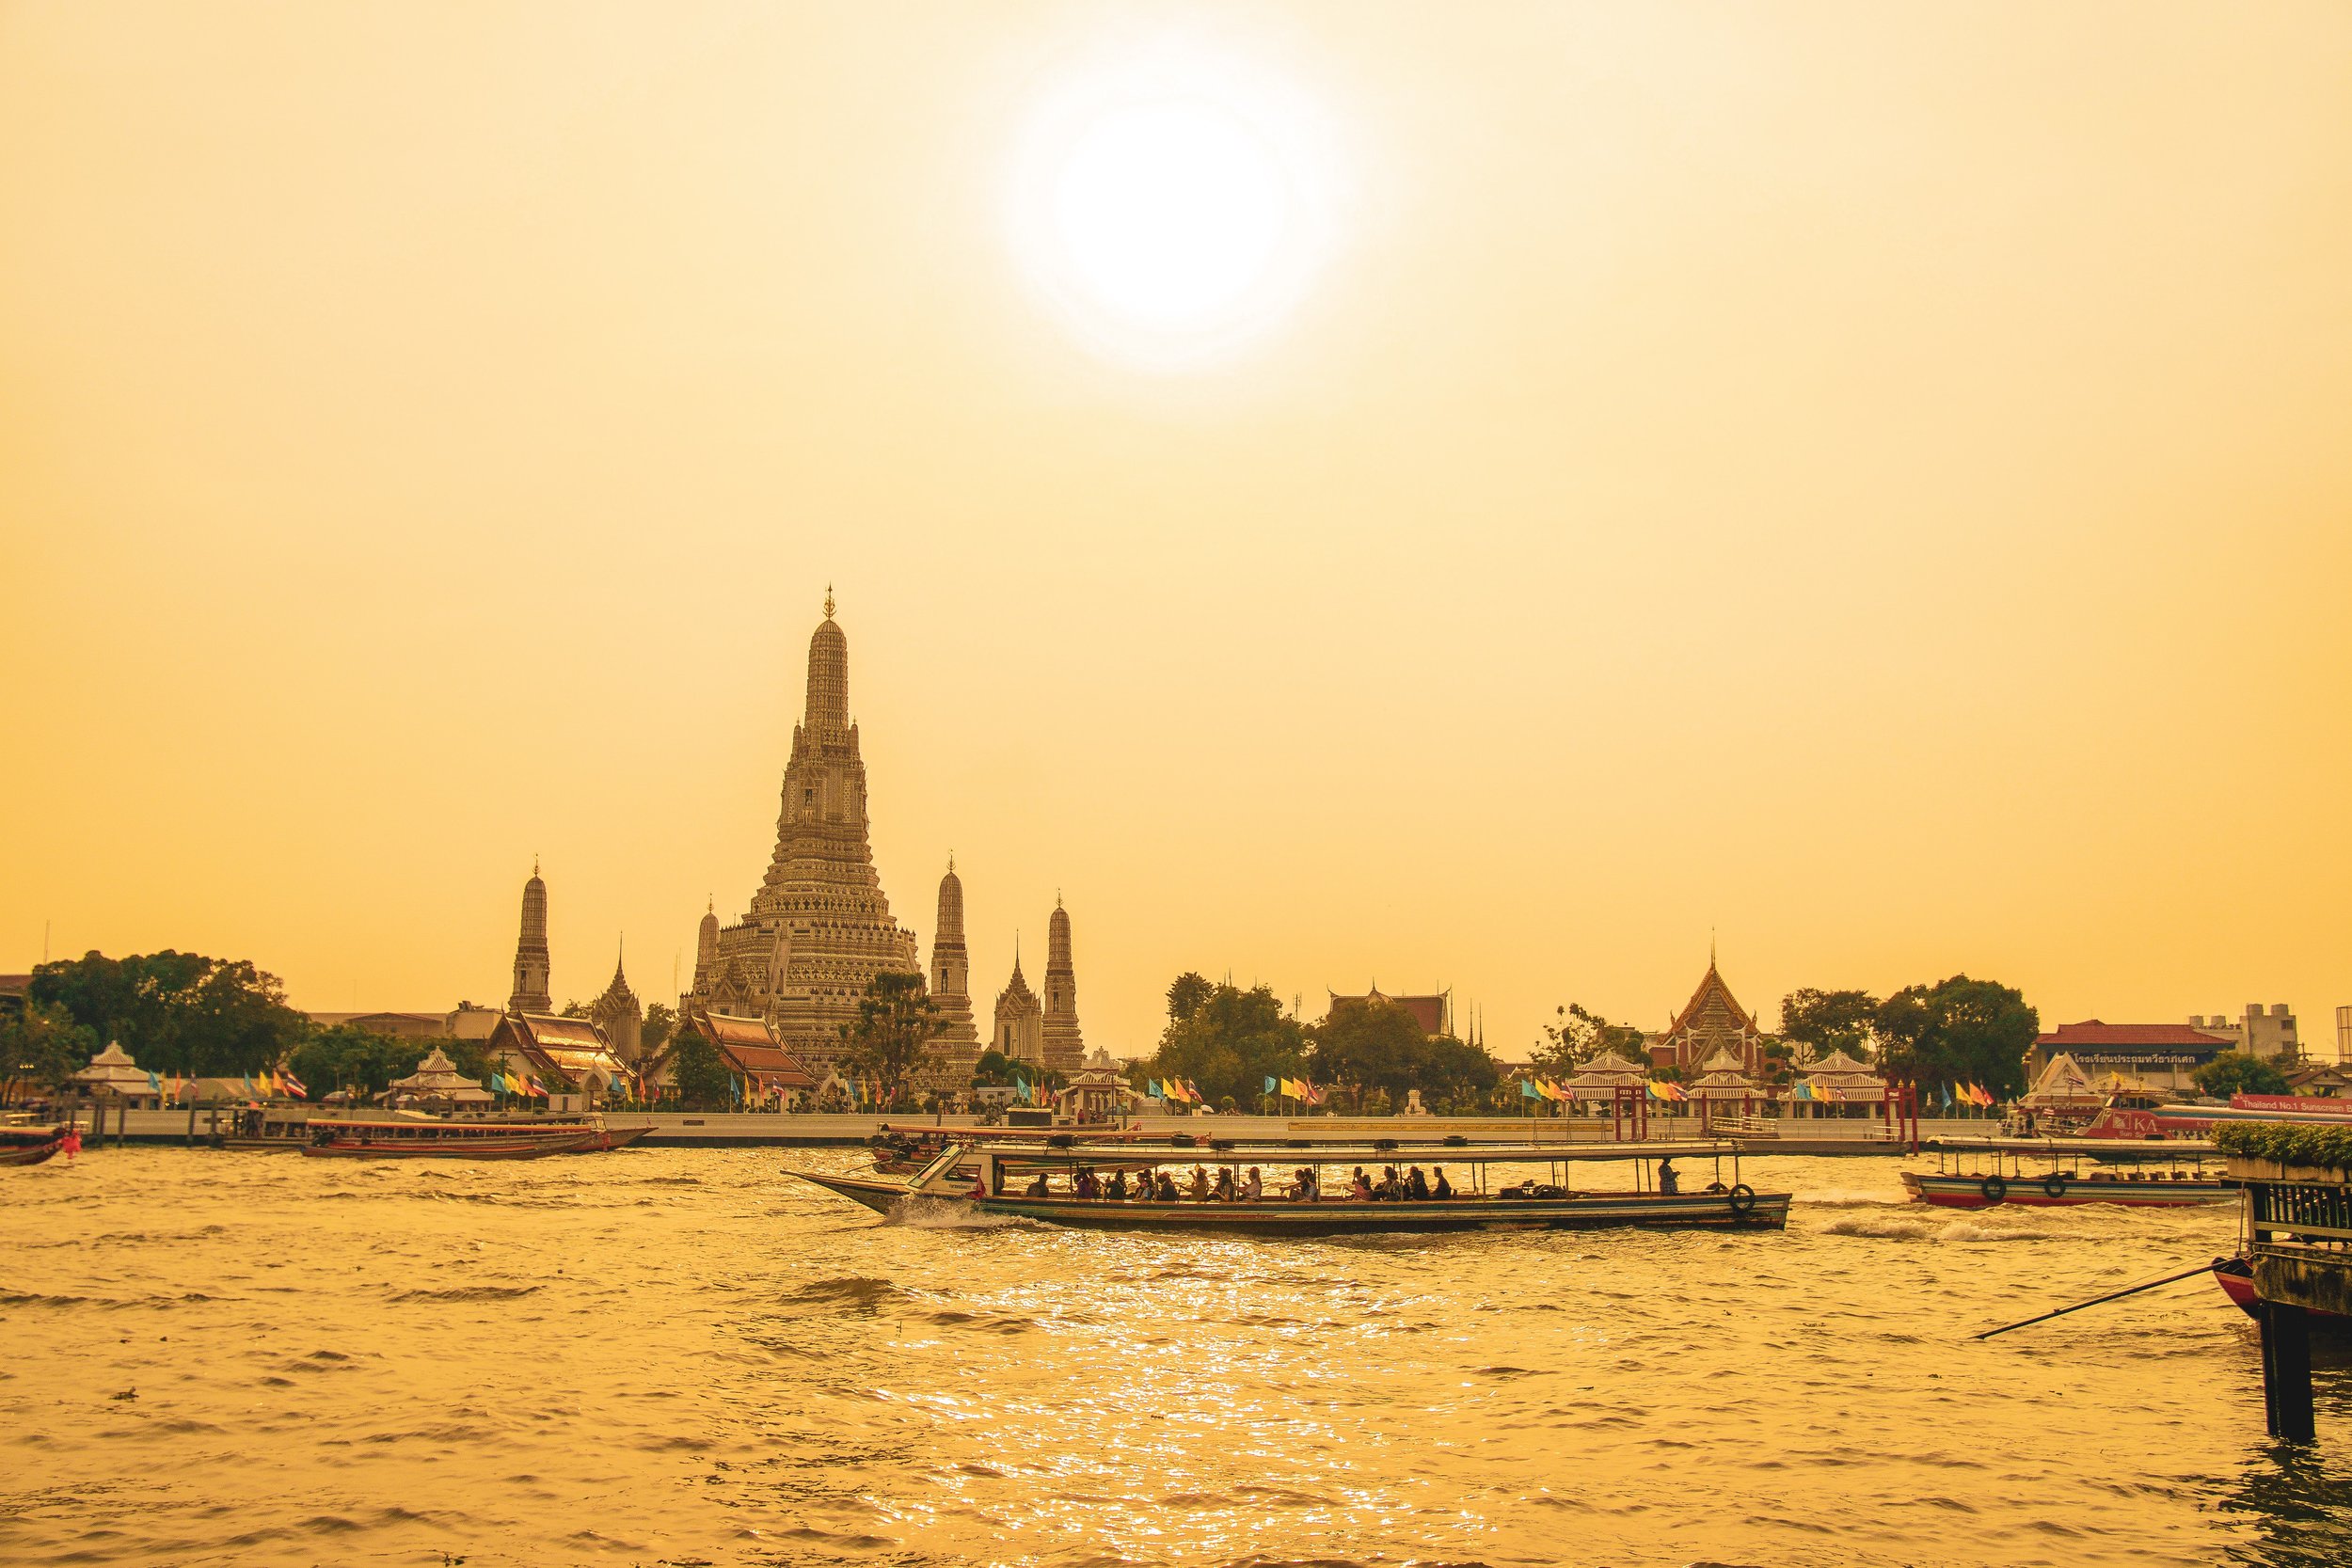 A boat on a river in thailand with temples in the background.jpg